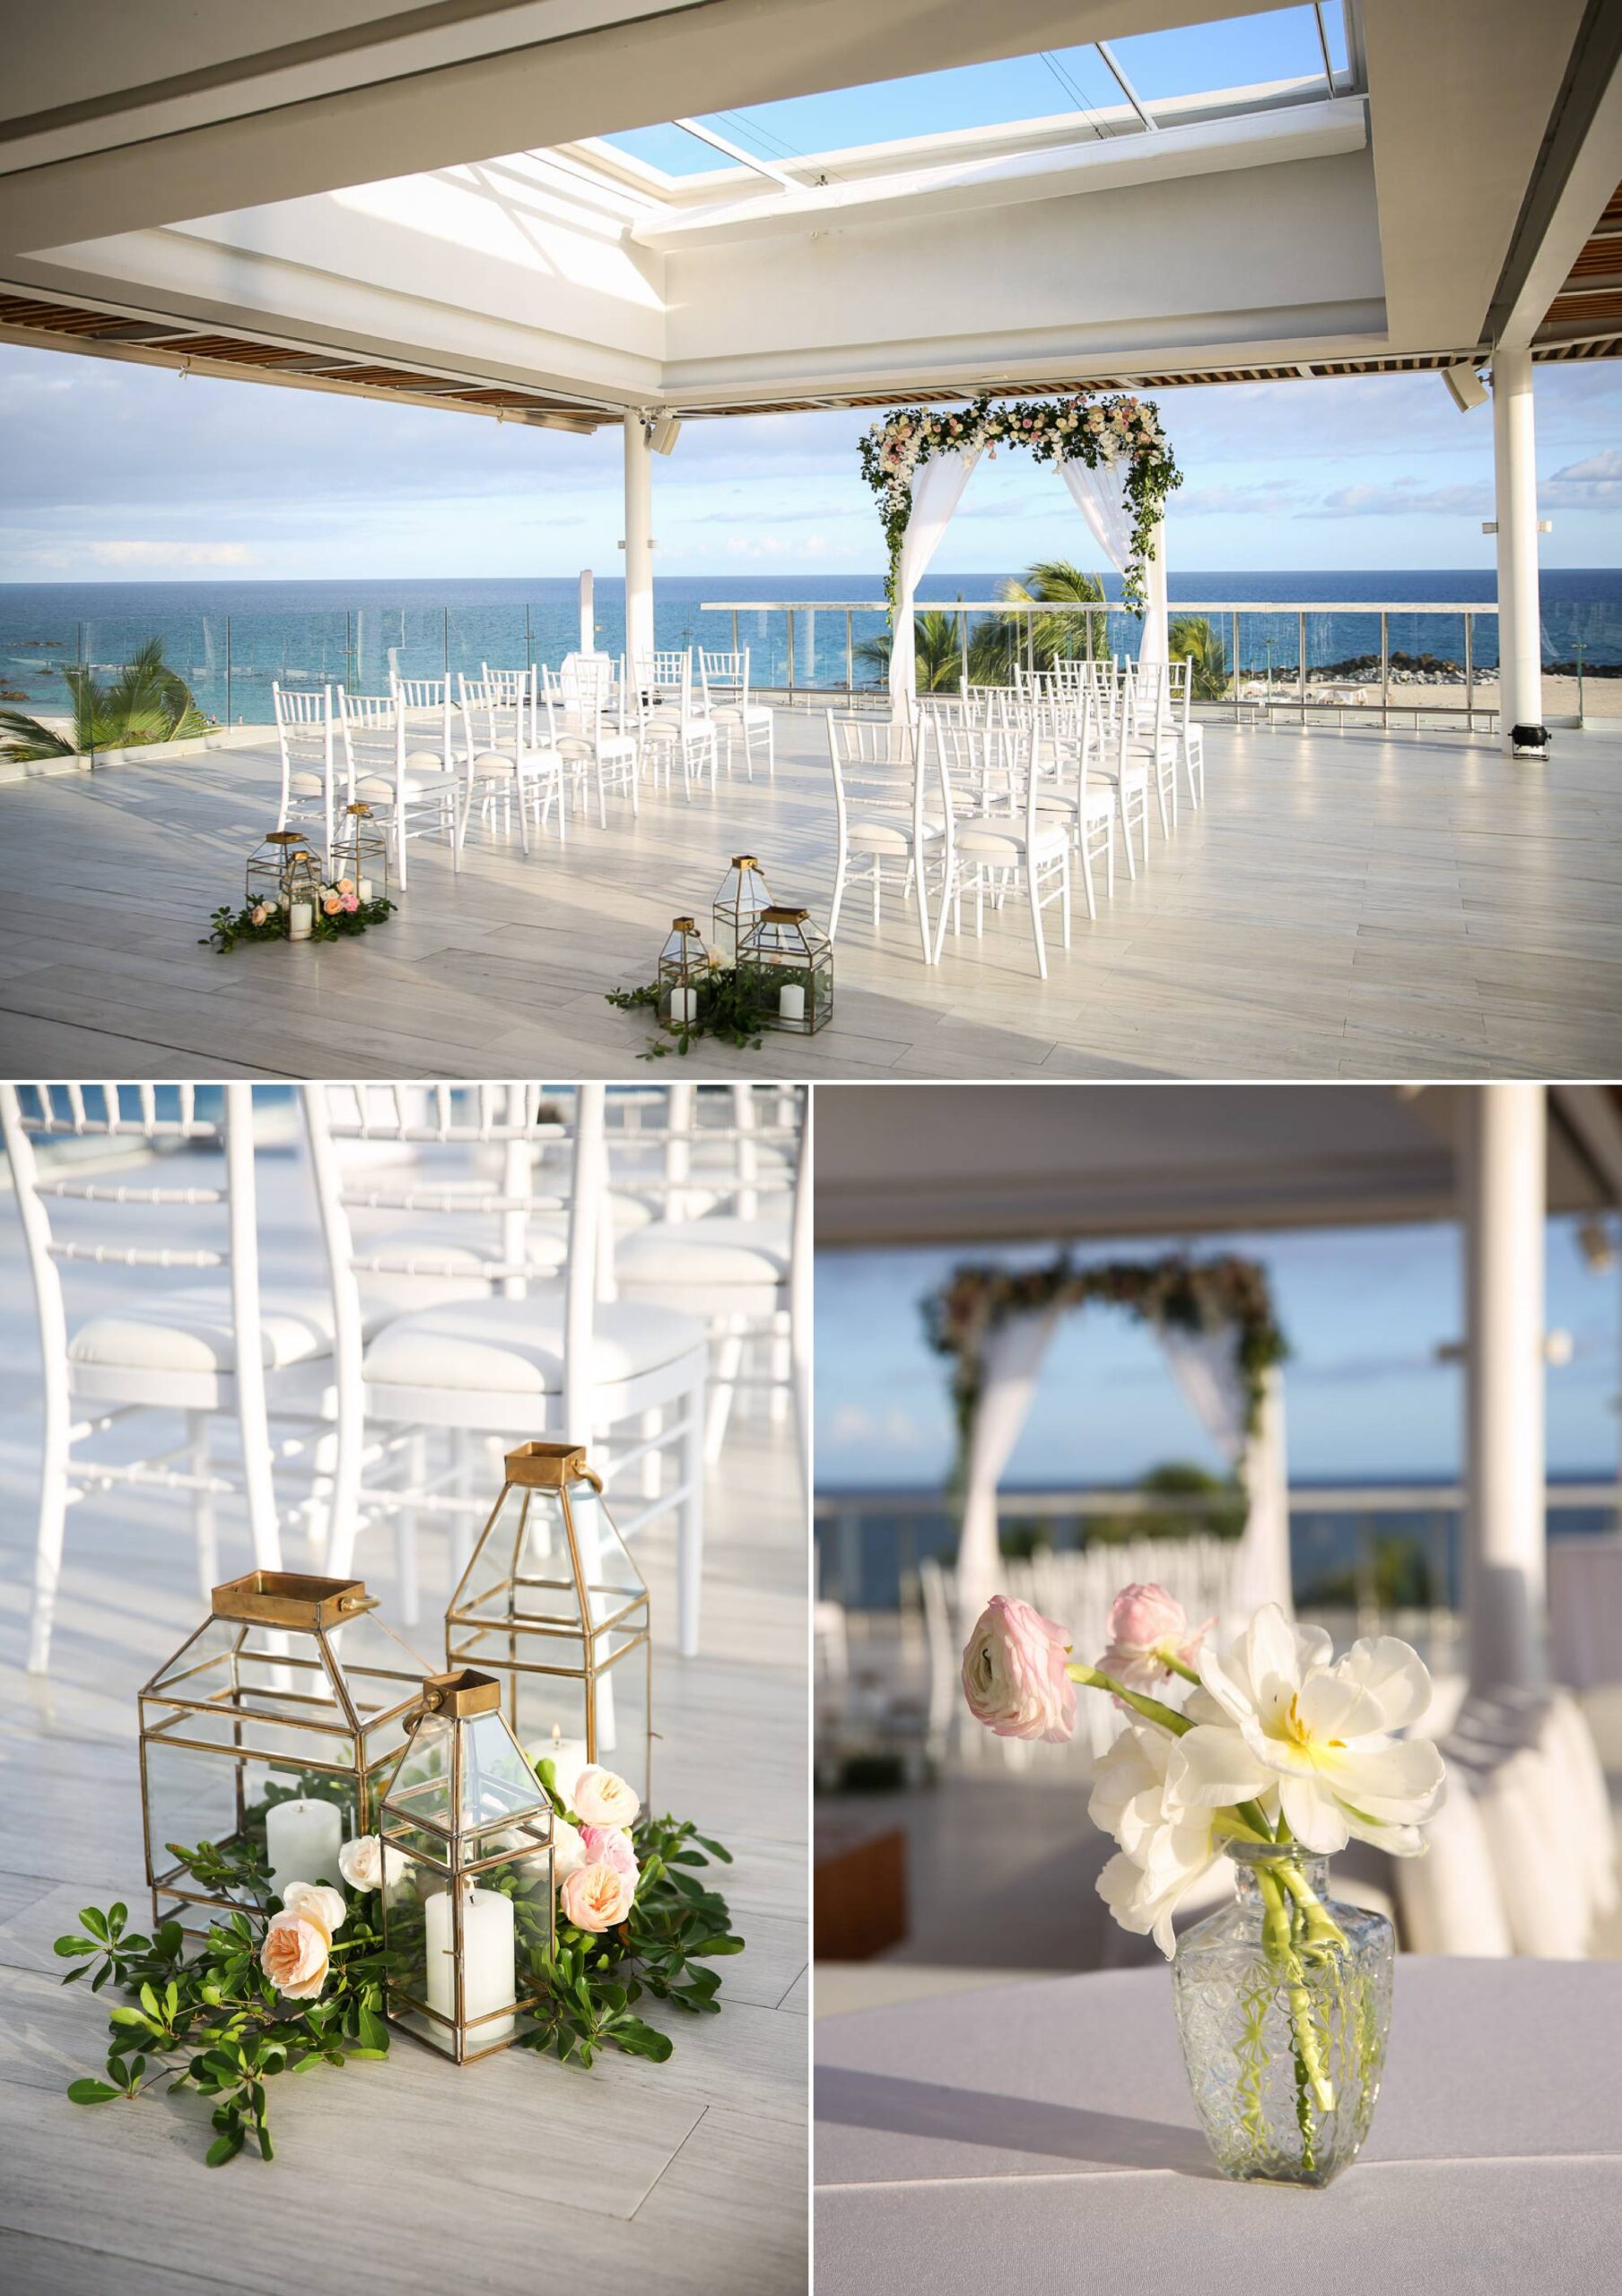 Wedding ceremony on balcony, decor with floral arch, white chairs and gold candle holders